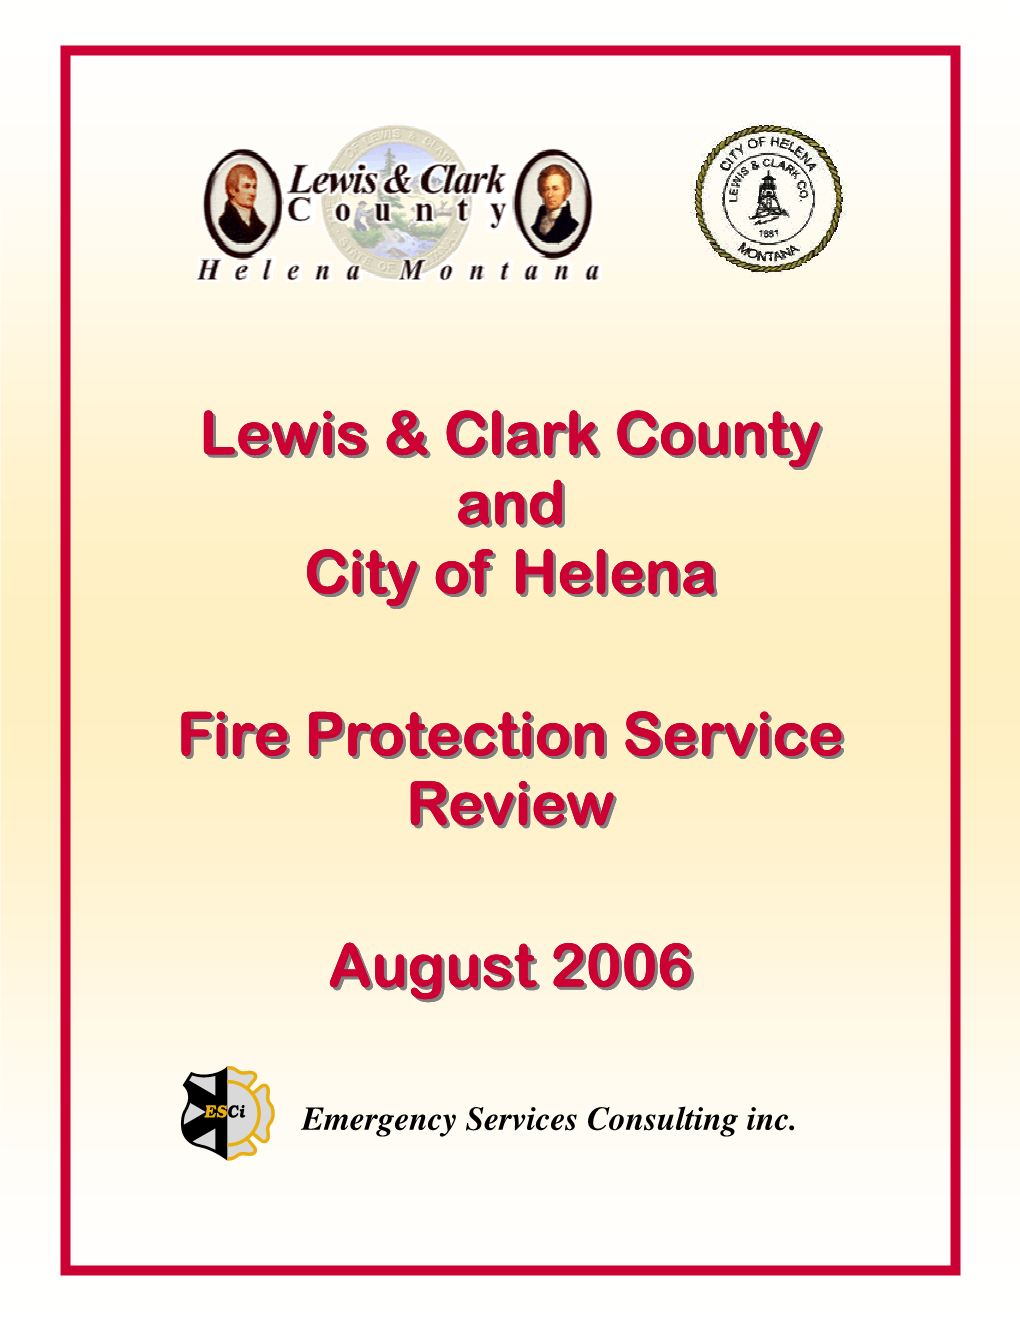 Lewis & Clark County and City of Helena Fire Protection Service Review August 2006